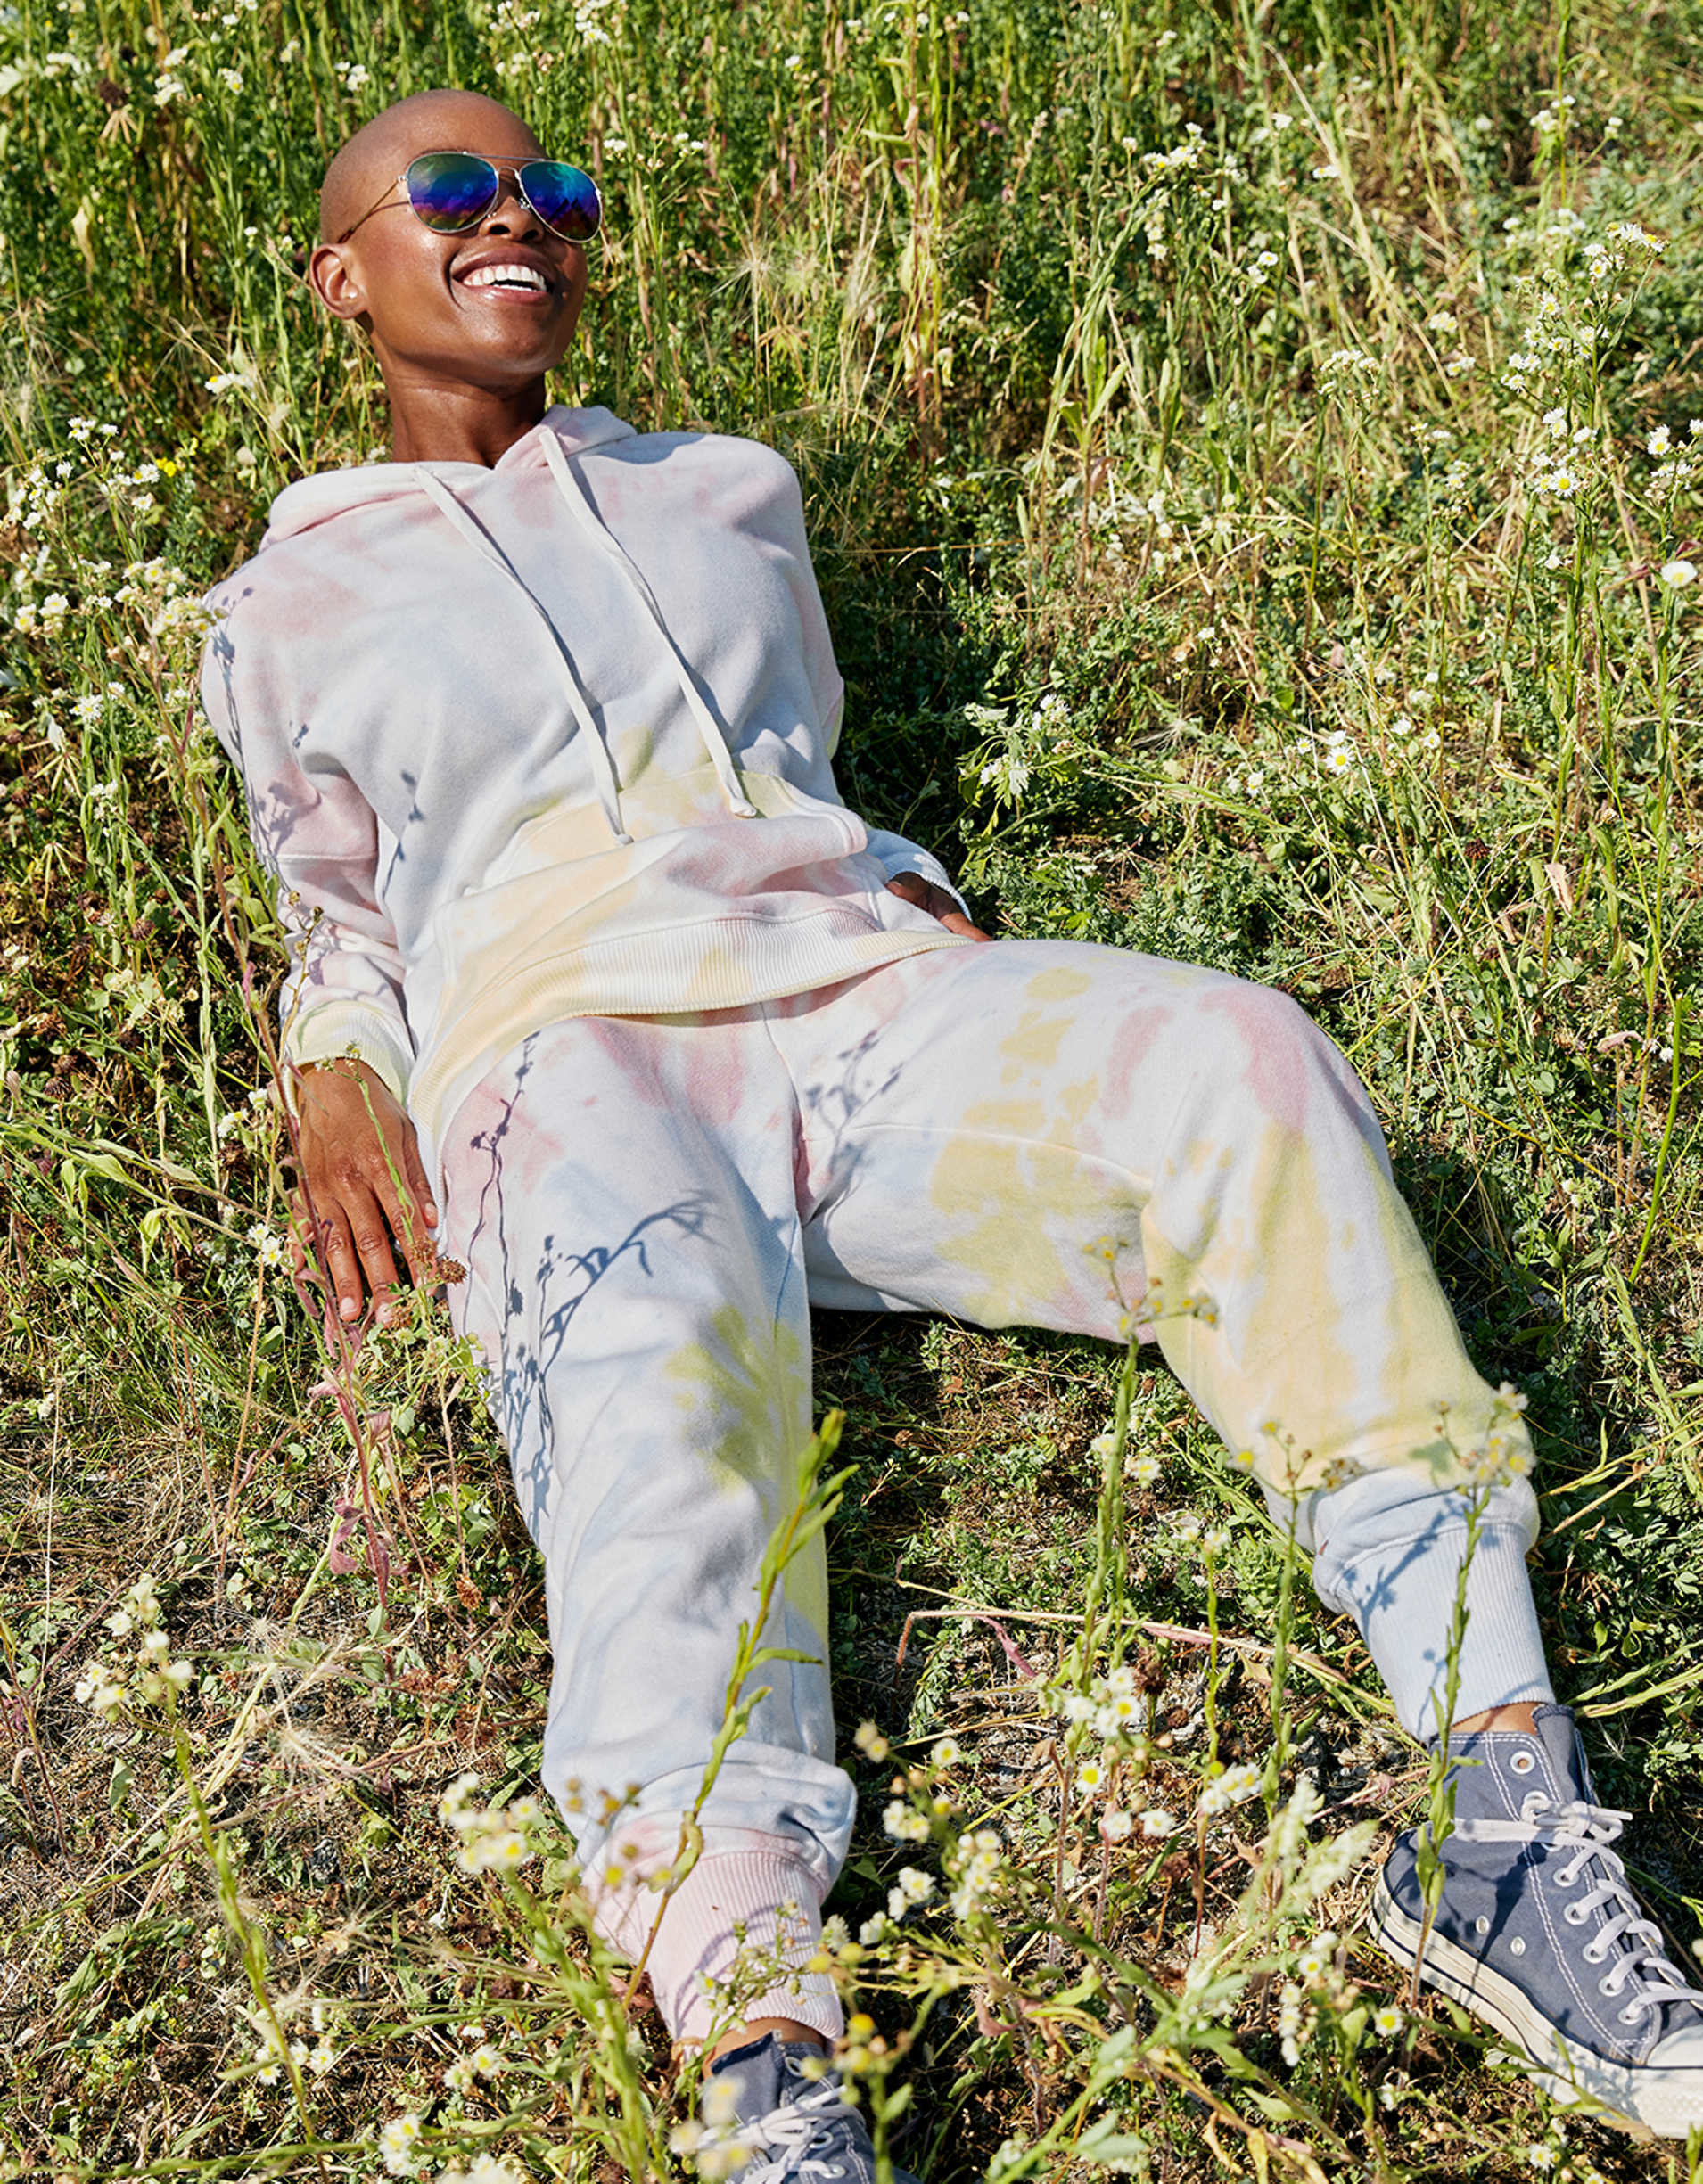 Model wearing the hooded sweatshirt and sweatpants with a muted pink, yellow, and blue tie-dye pattern on both